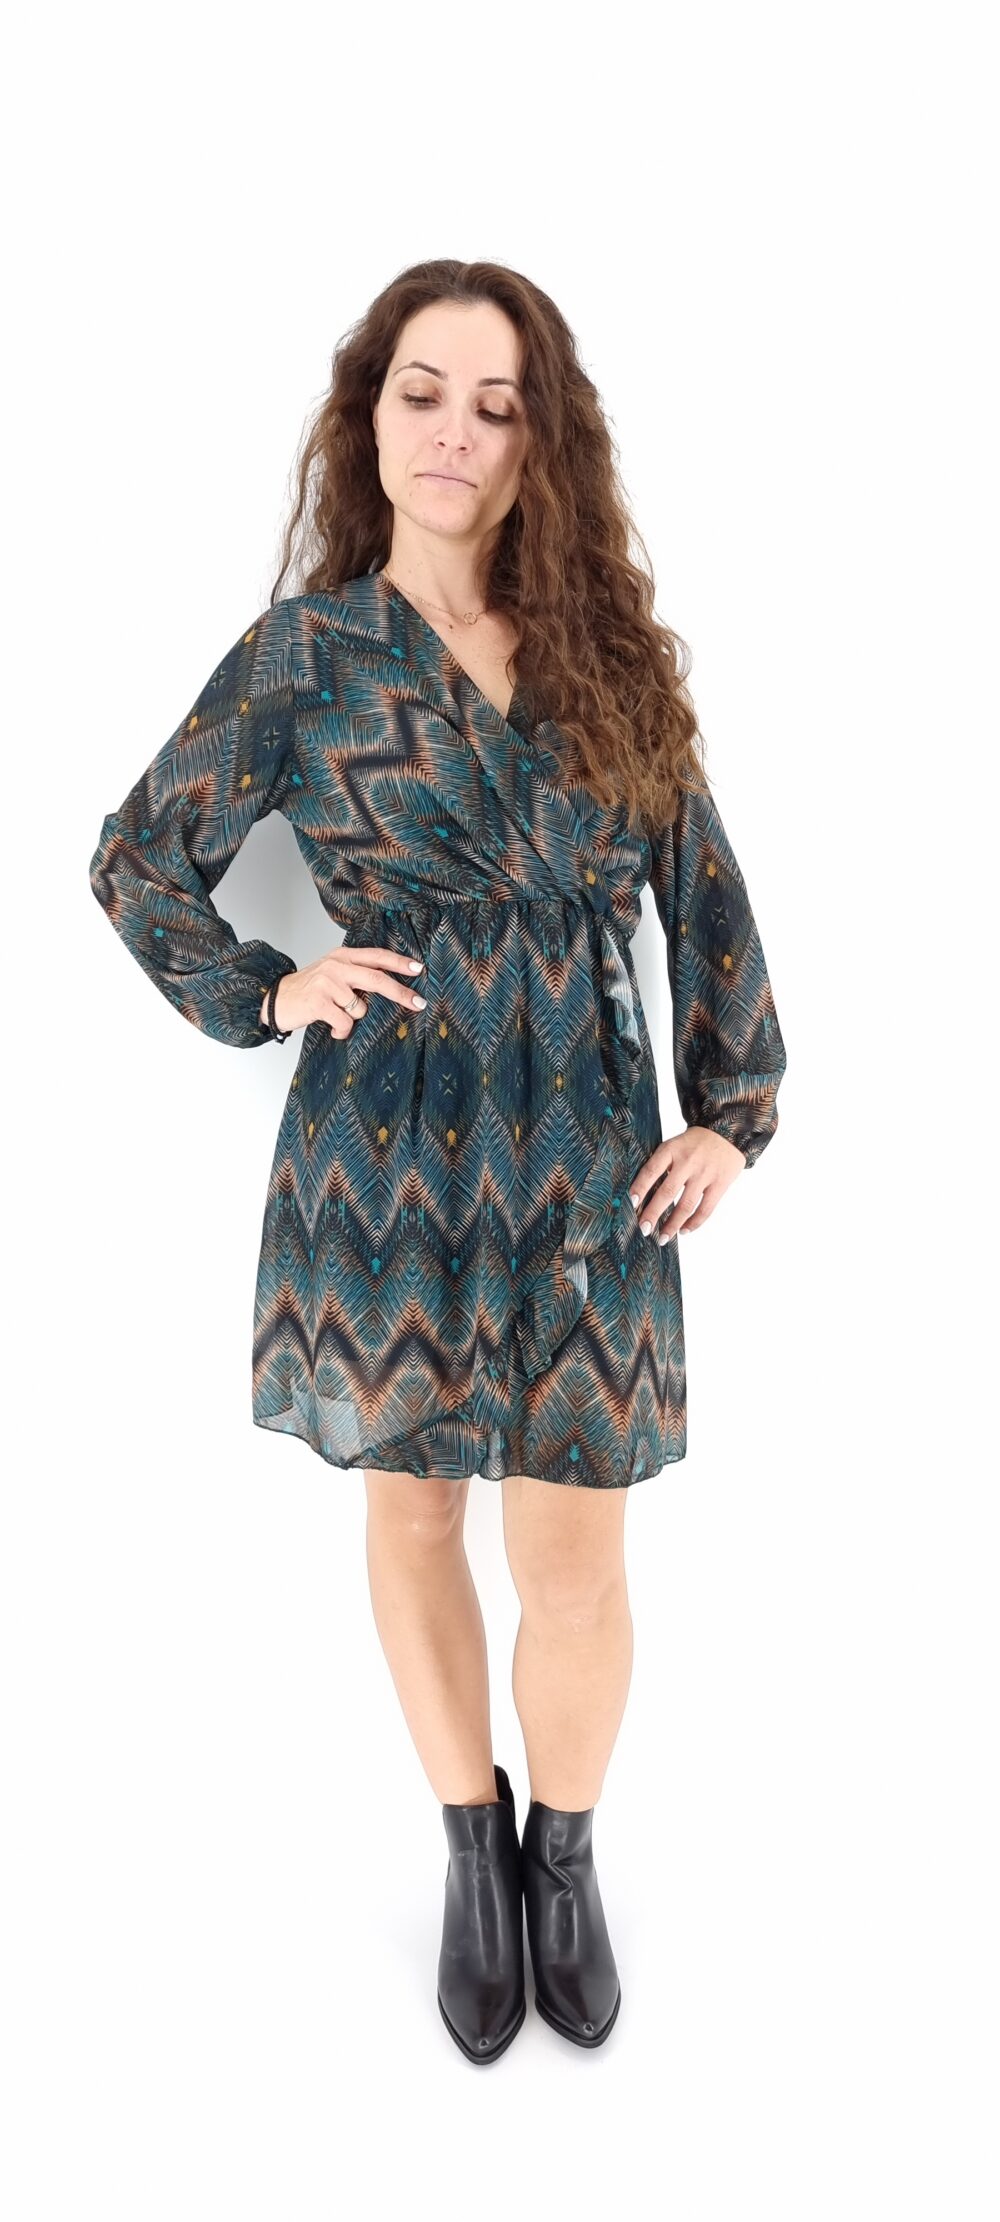 Short cruise dress with colorful pattern in blue shades